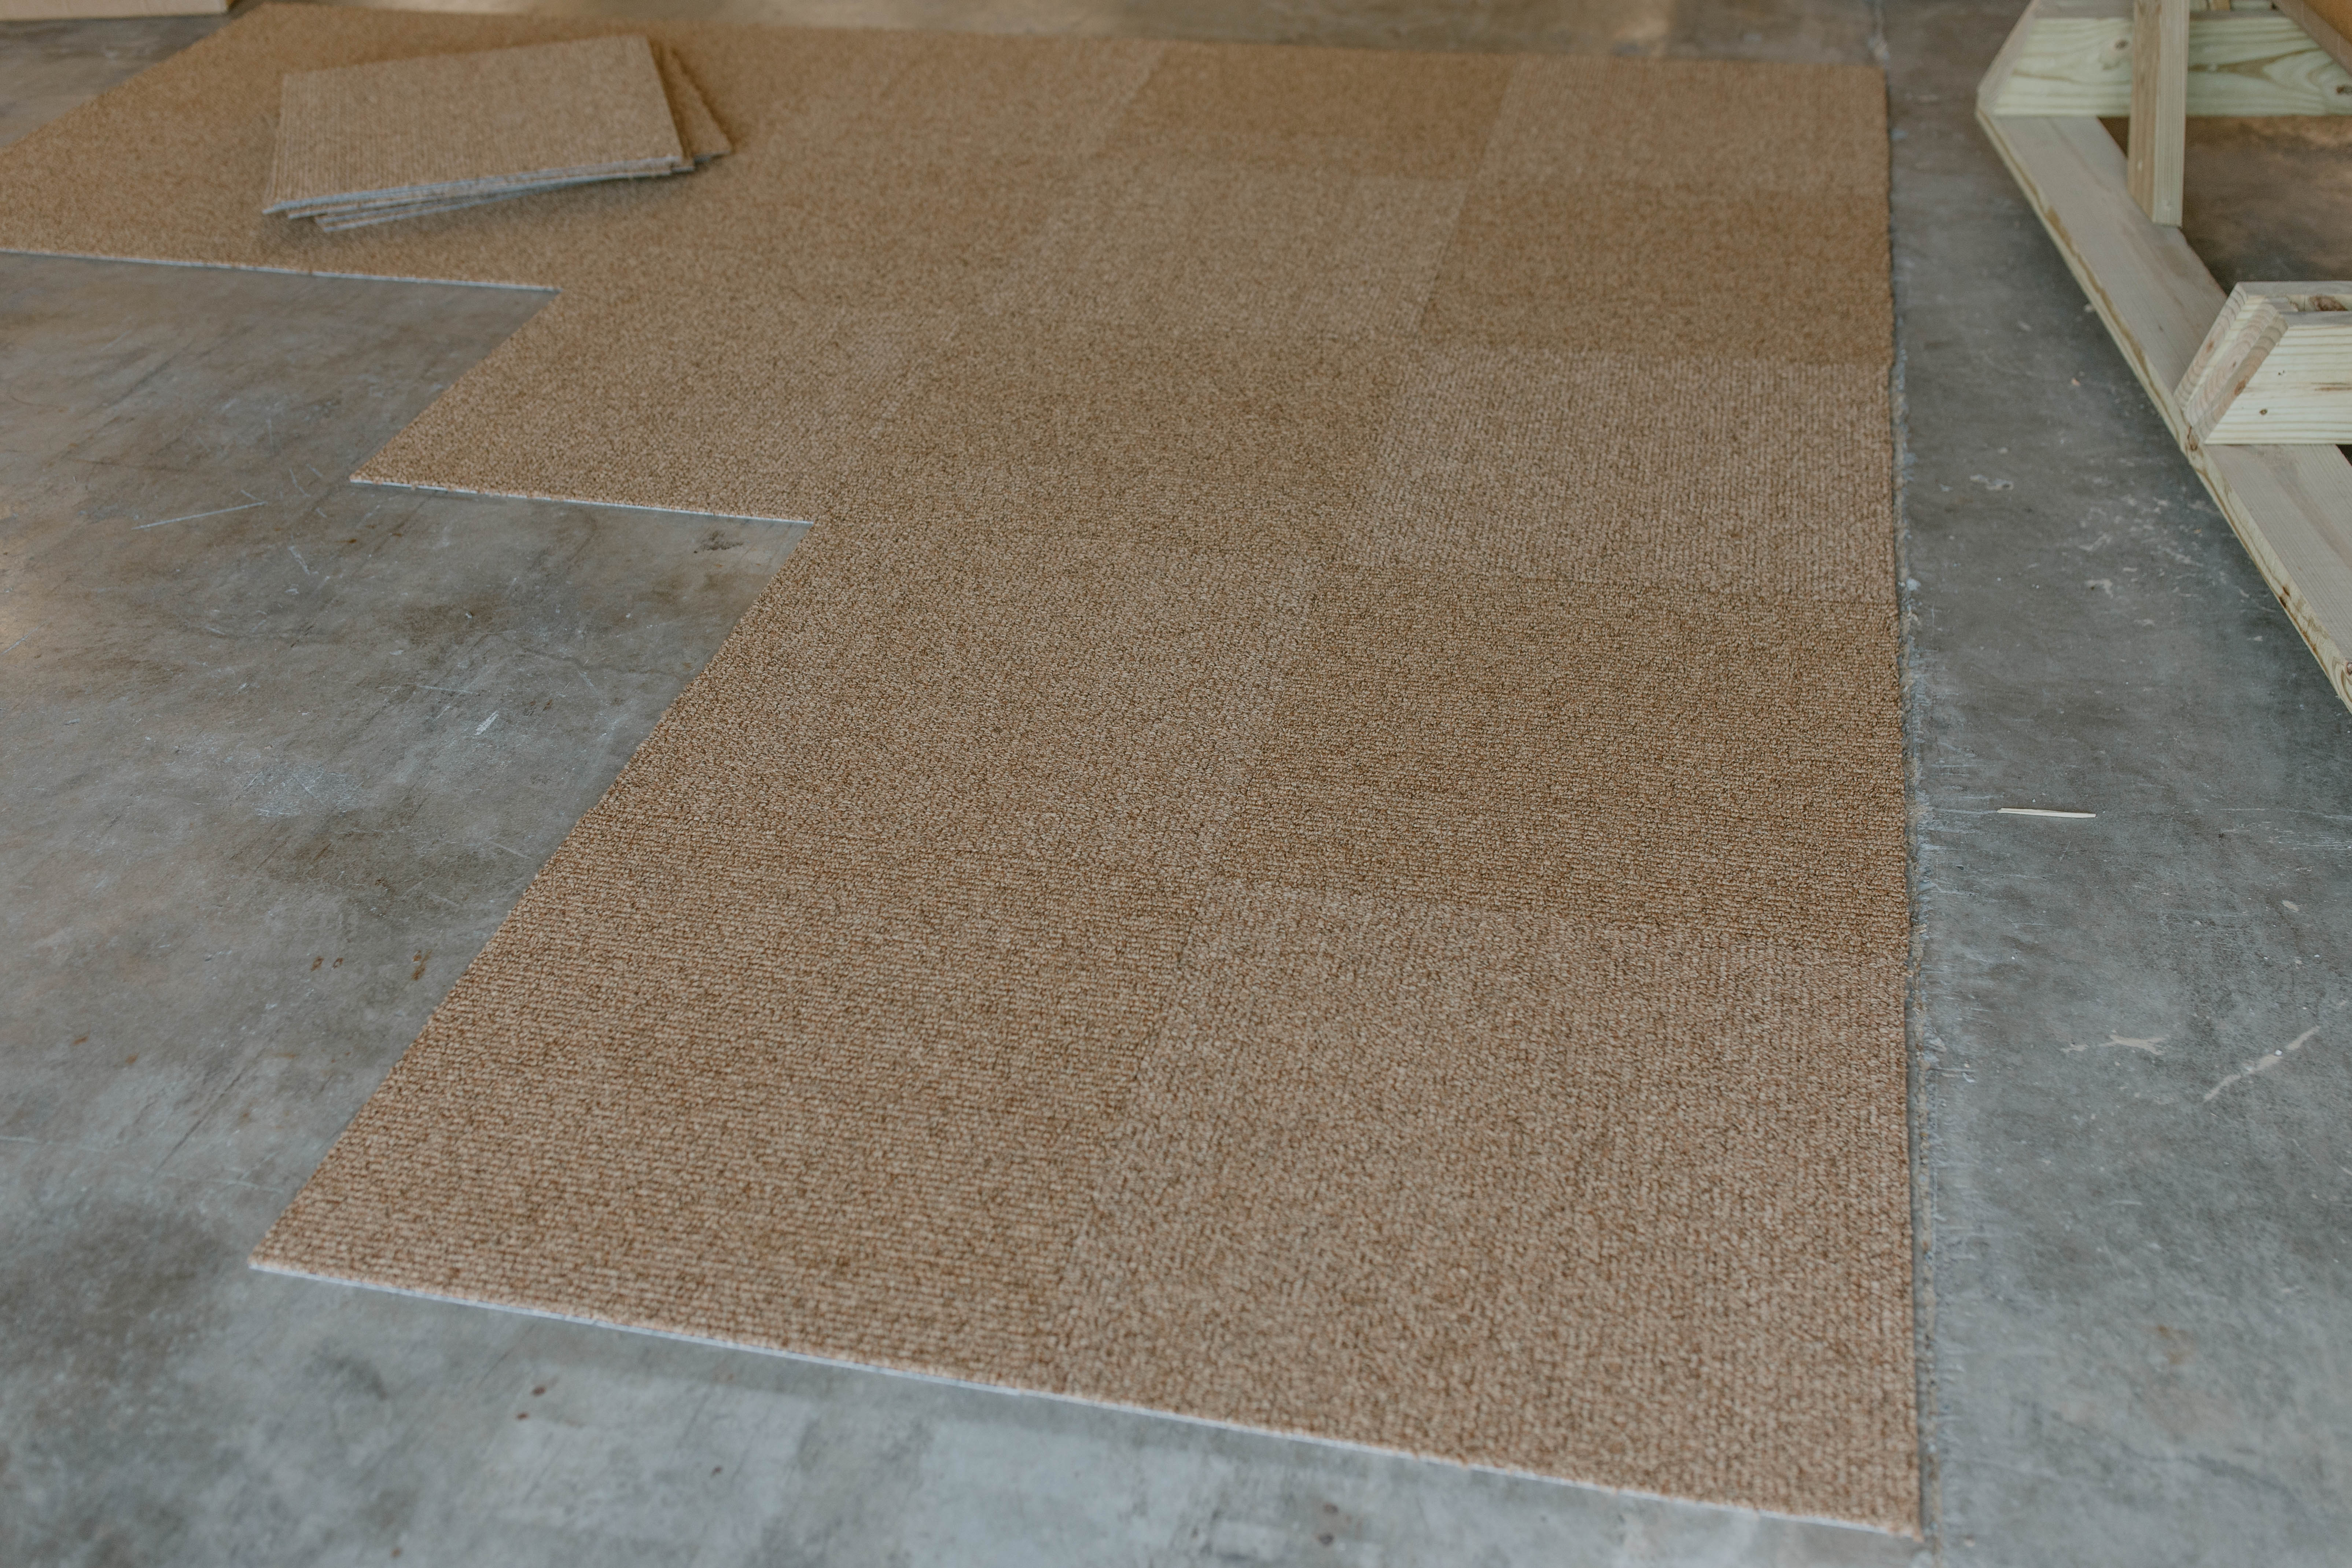 The Best Way to Lay Carpet Tiles on Tackifier Adhesive